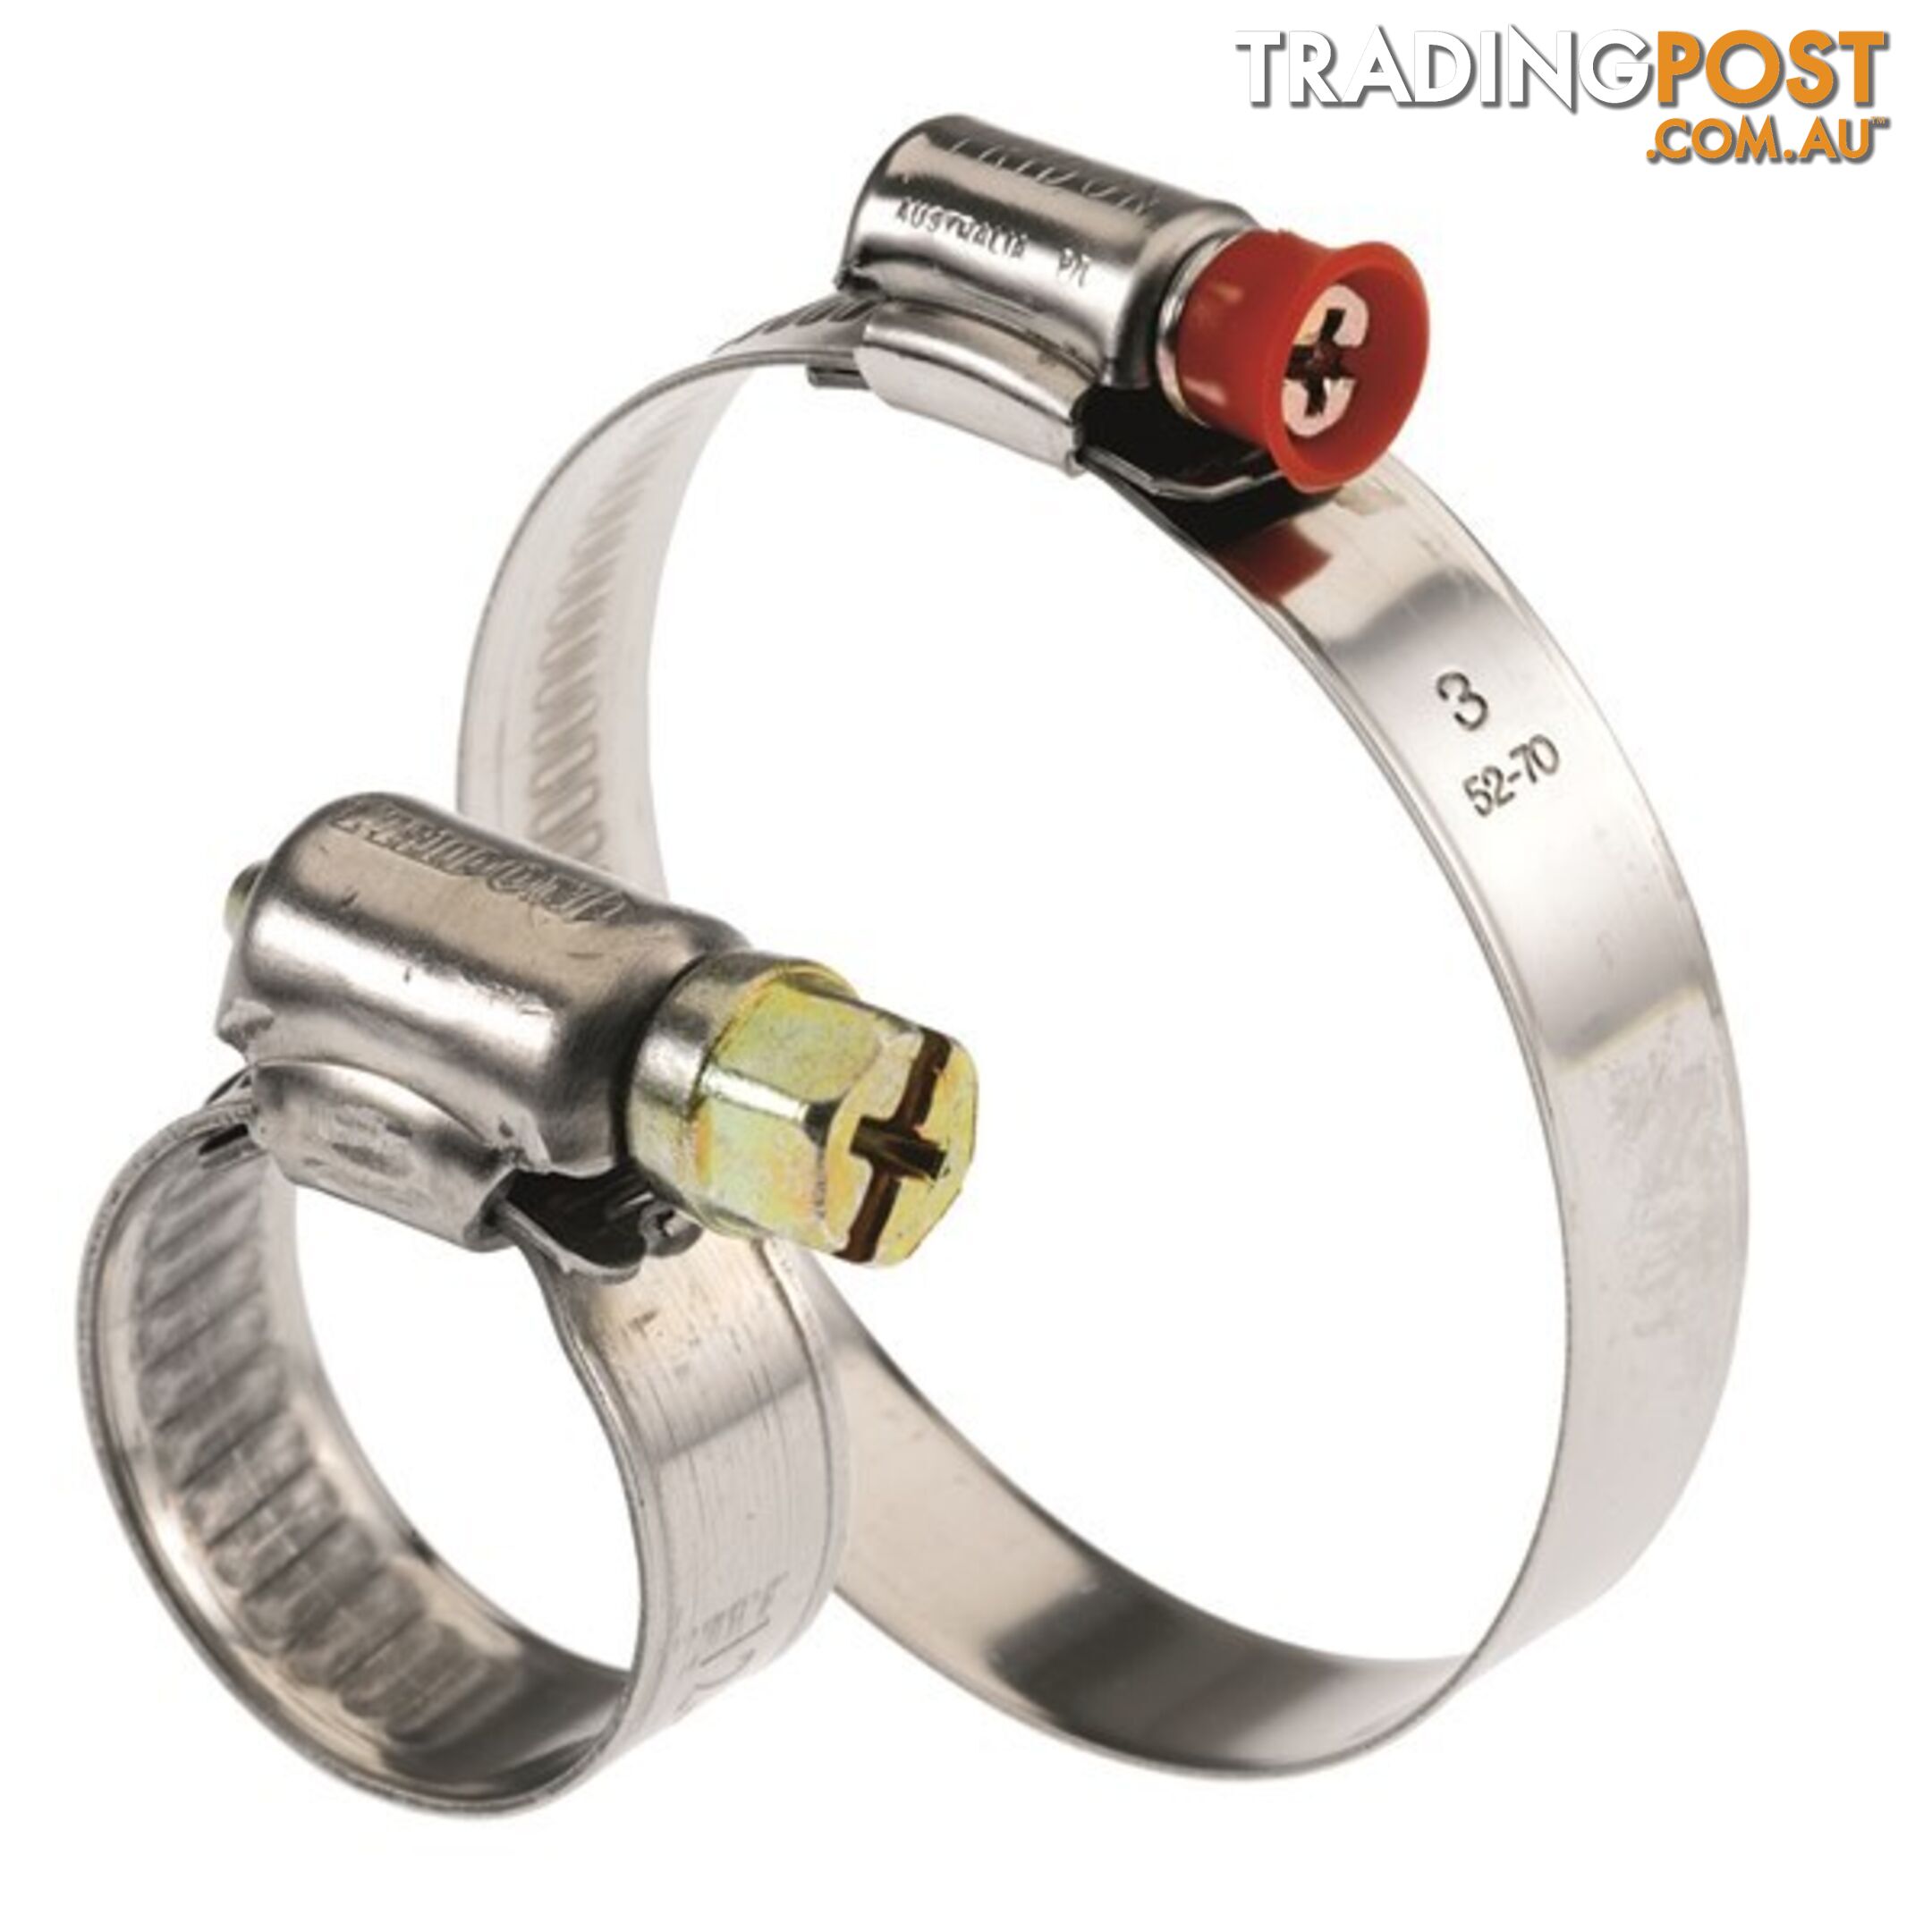 Tridon Part S.S Hose Clamp 85mm- 110mm Multi Purpose Solid Band 10pk SKU - MP5P